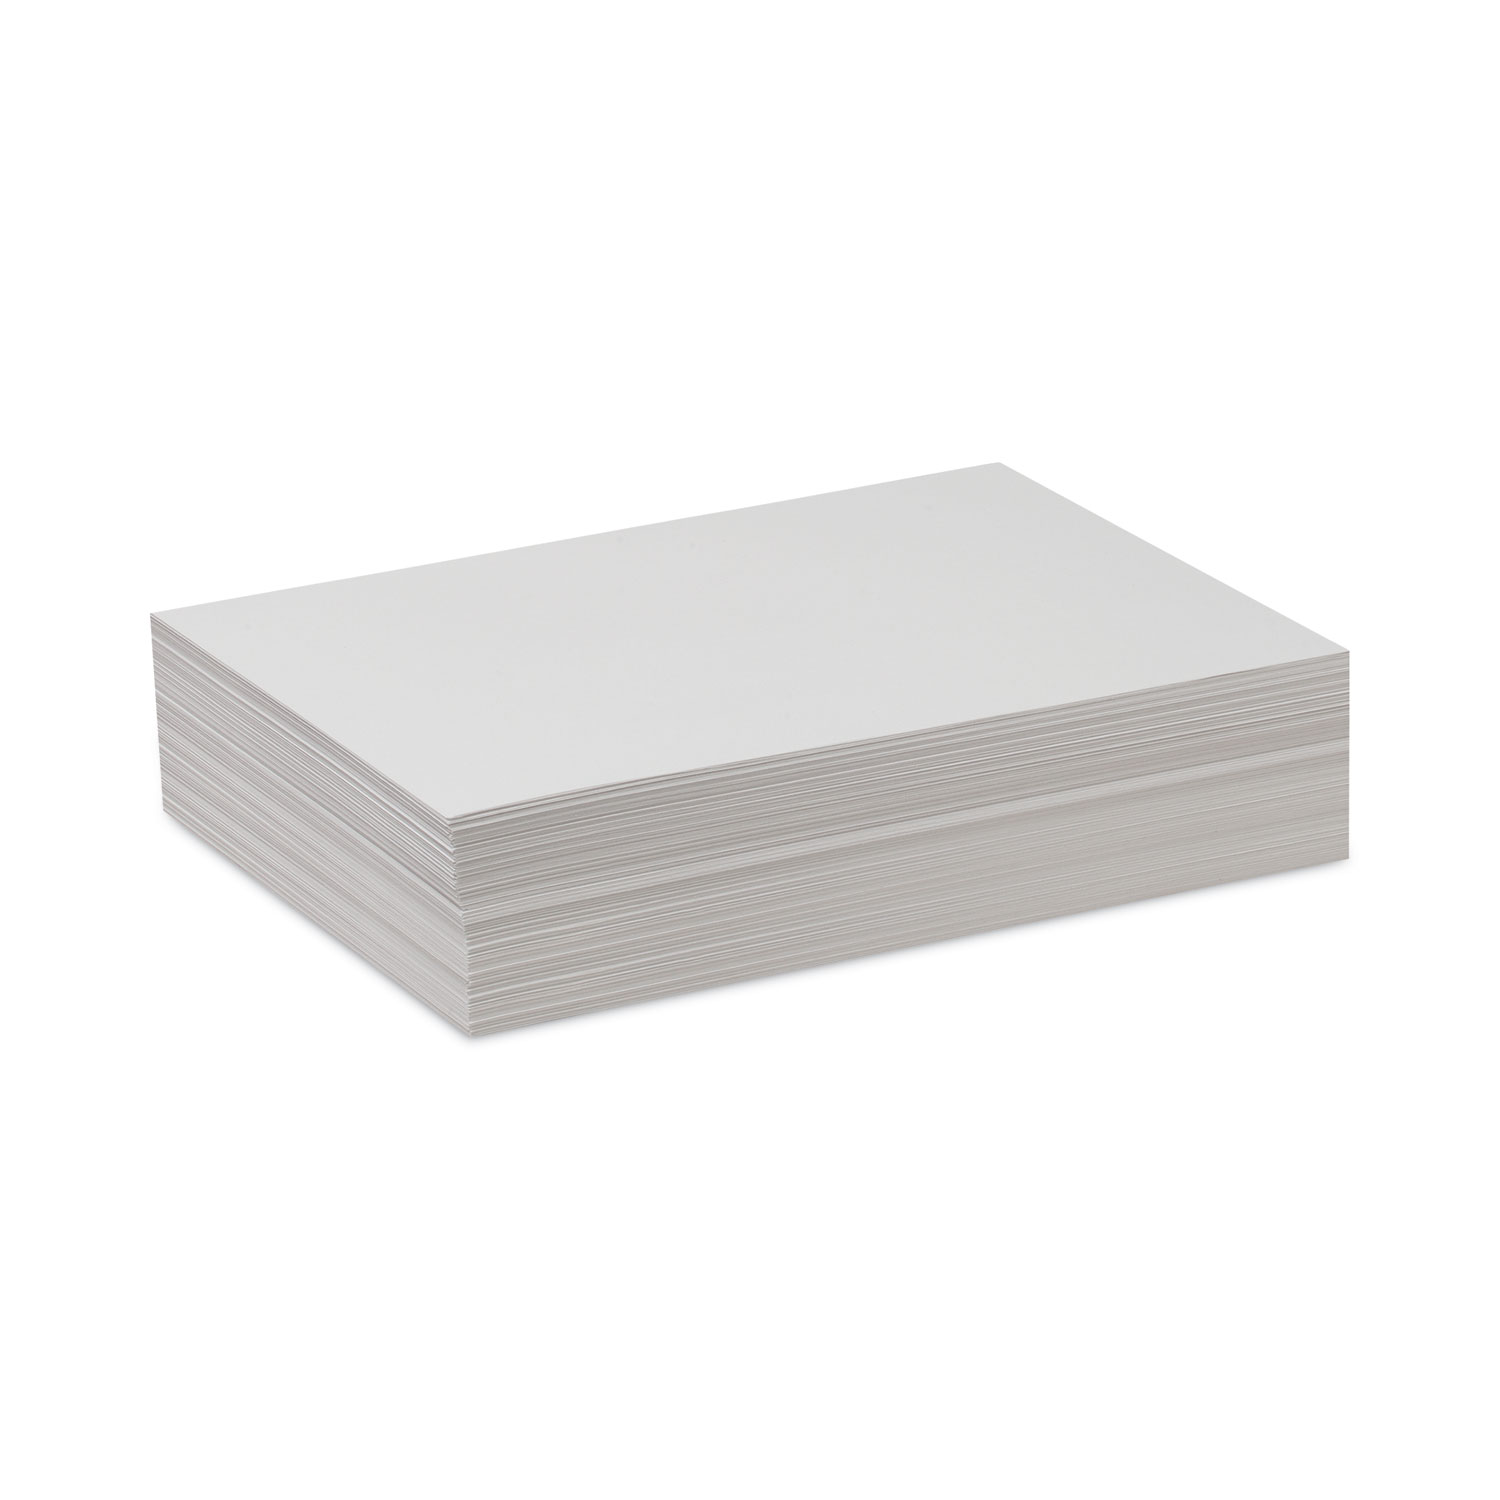 Pacon White Drawing Paper, 47 lbs., 9 x 12, Pure White, 500